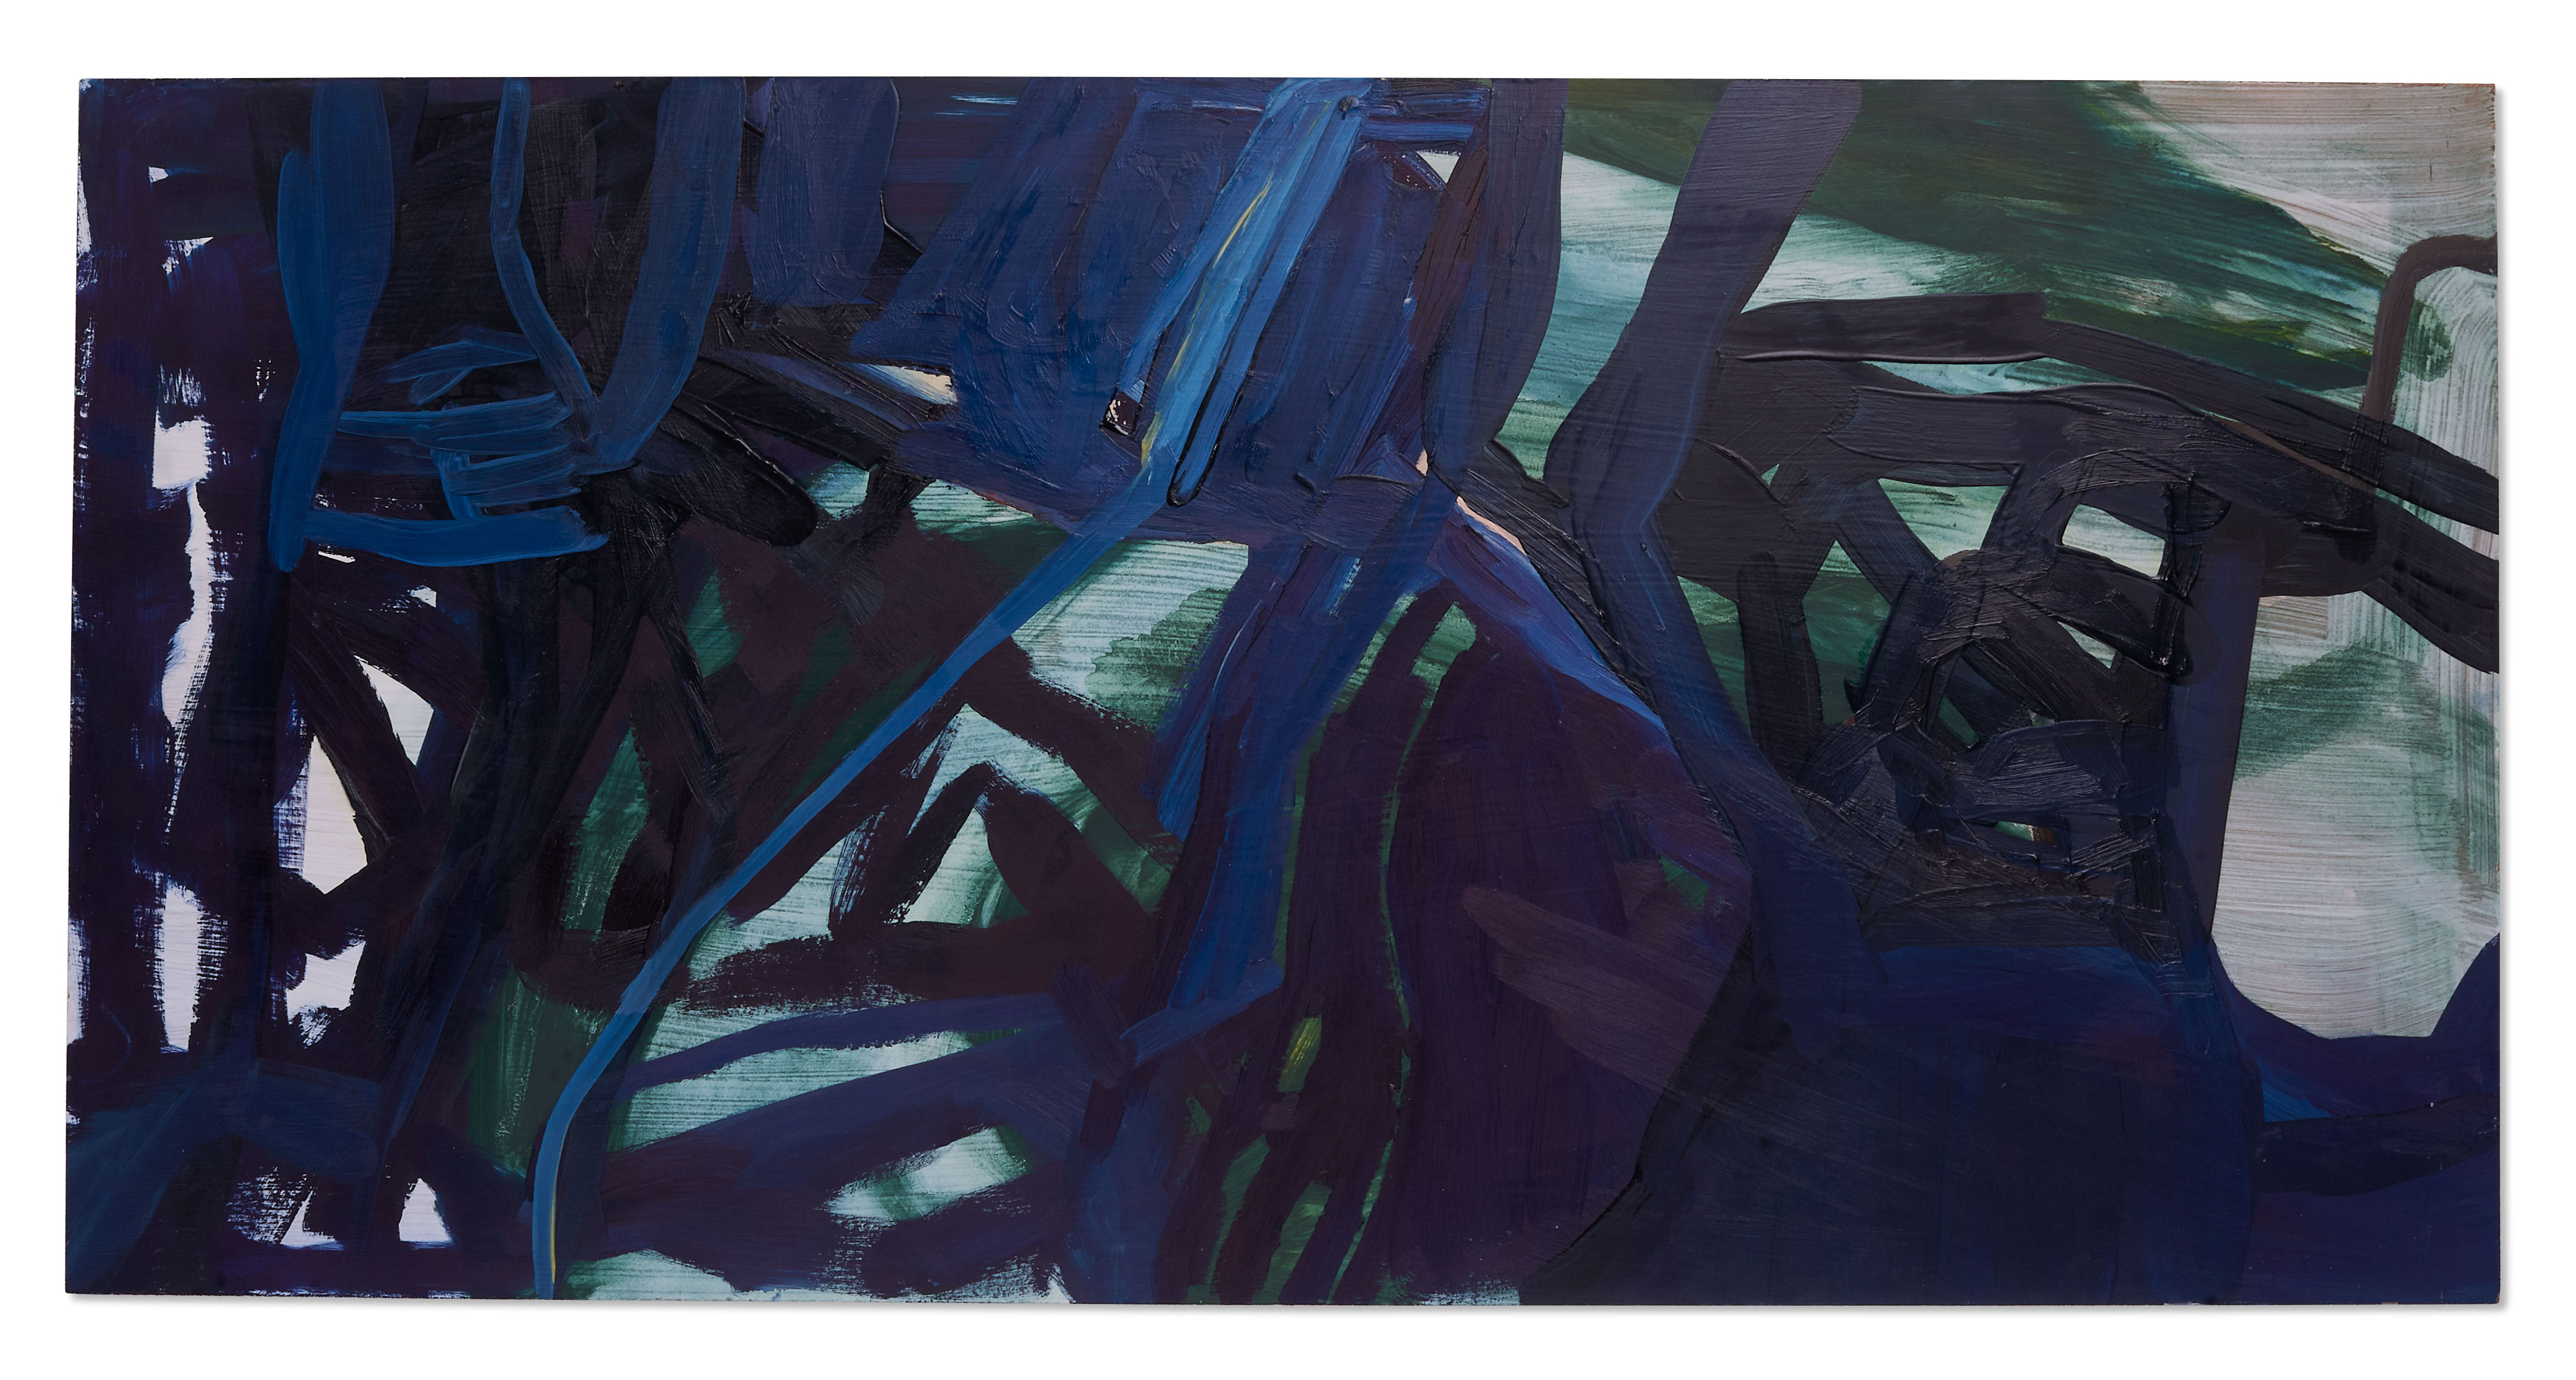 A photograph of a rectangular abstract painting that is oriented vertically by the artist Caroline Coolidge. The painting has layered thick, textual lines of dark blue and green paint in the foreground and thicker pale green and white brushy strokes in the background.
            